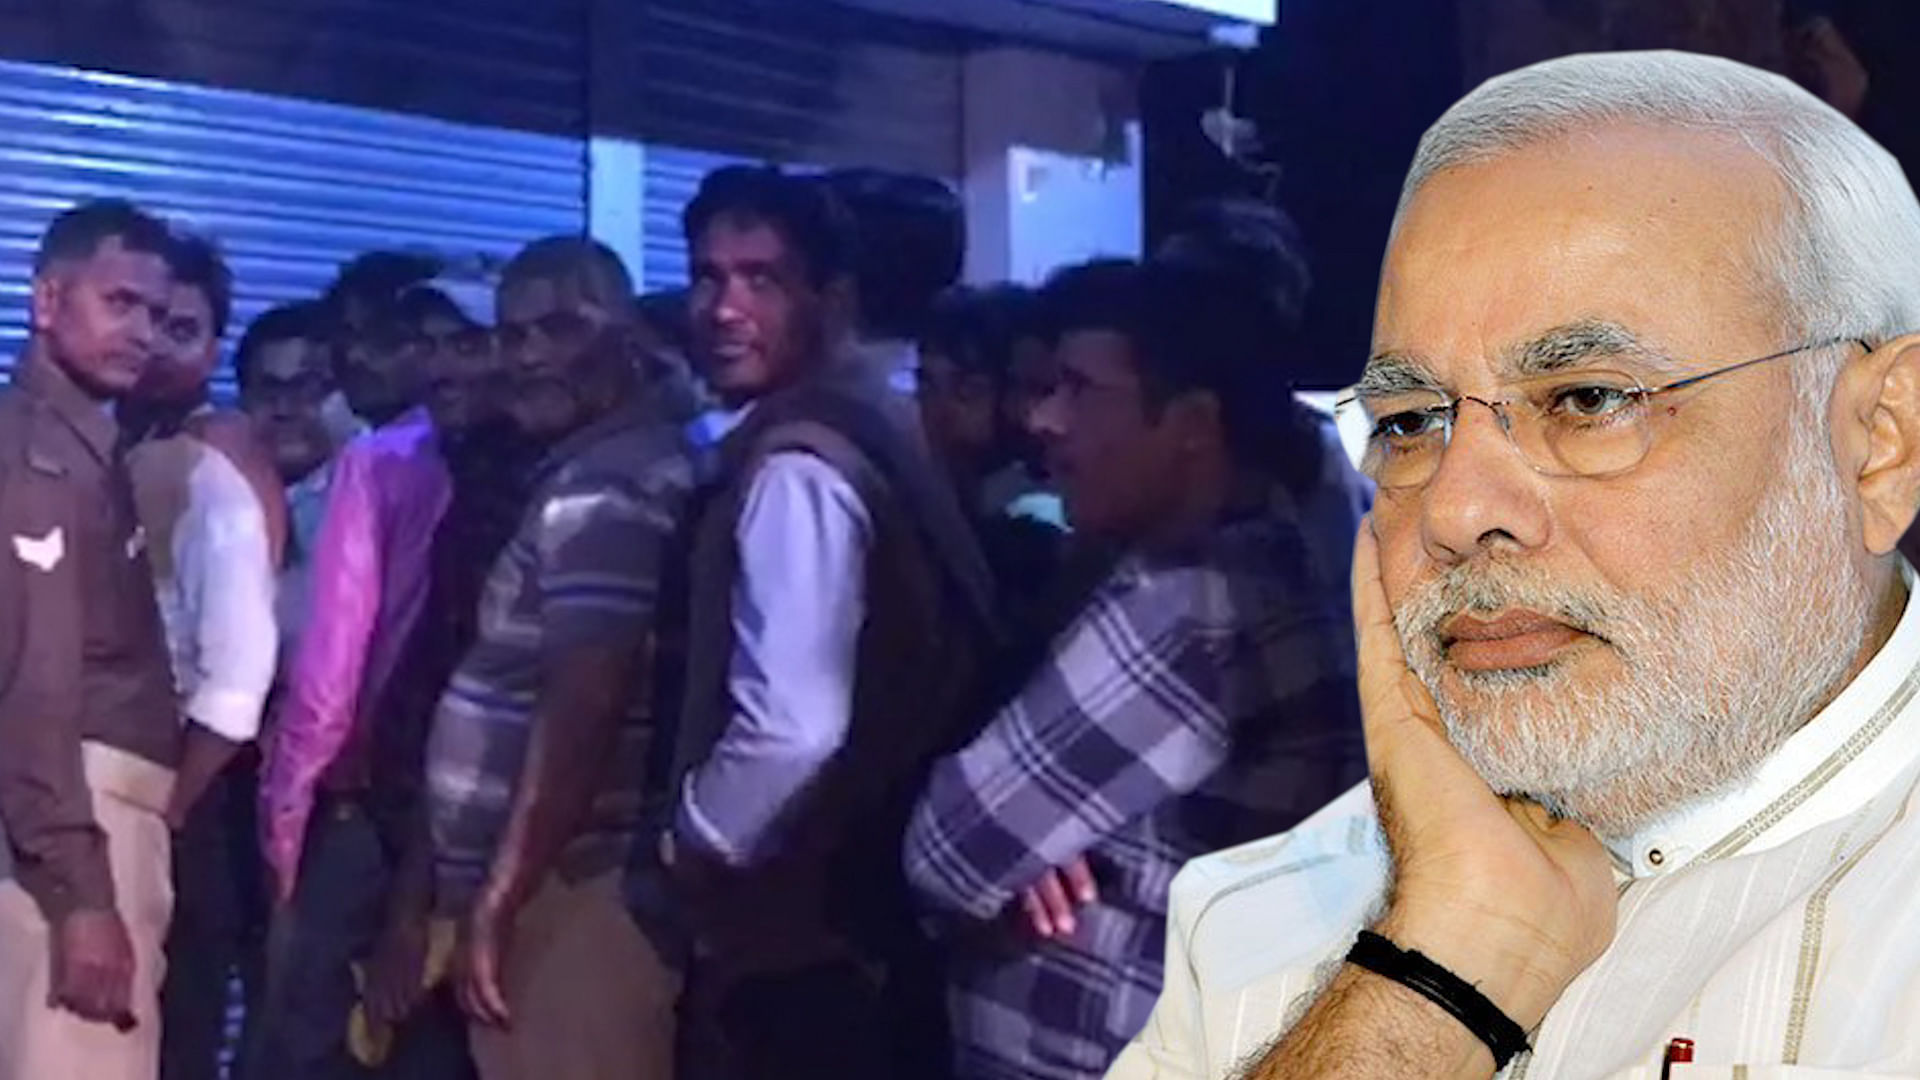 People express disappointment in Modi and his move to curb black money (Photo: The Quint)